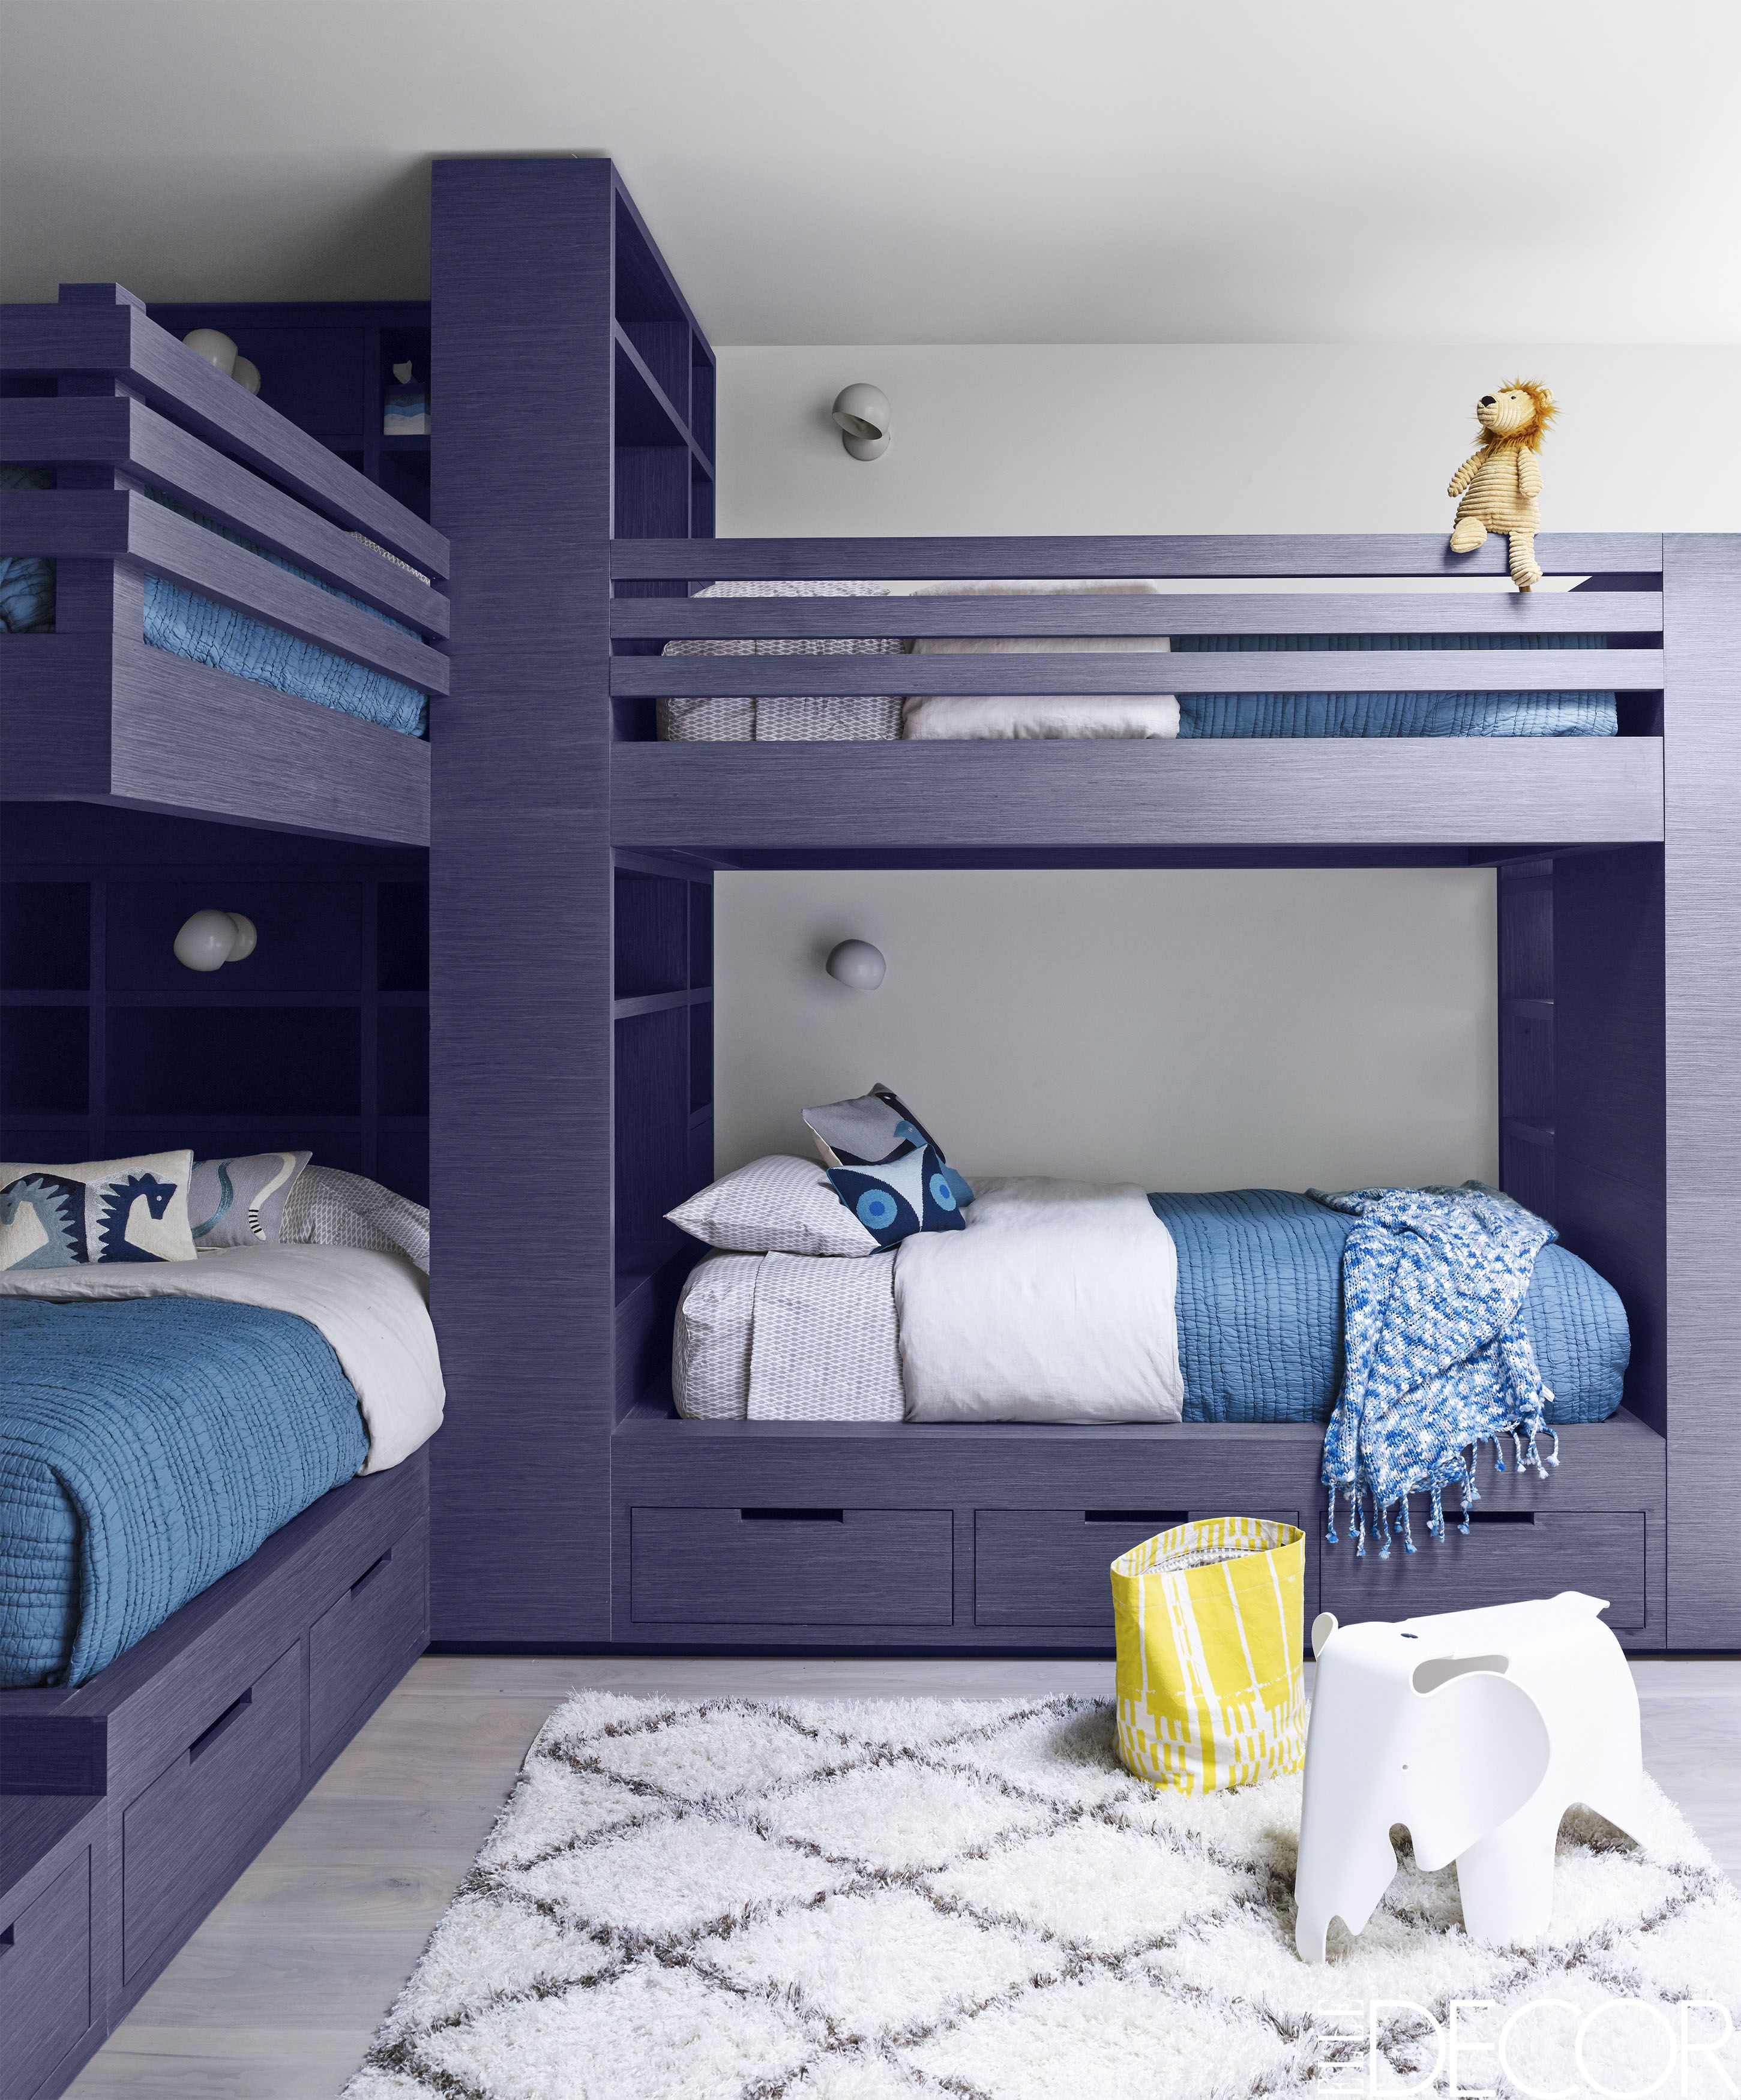 20 great bedroom ideas for boys - decorate a chic and youthful space